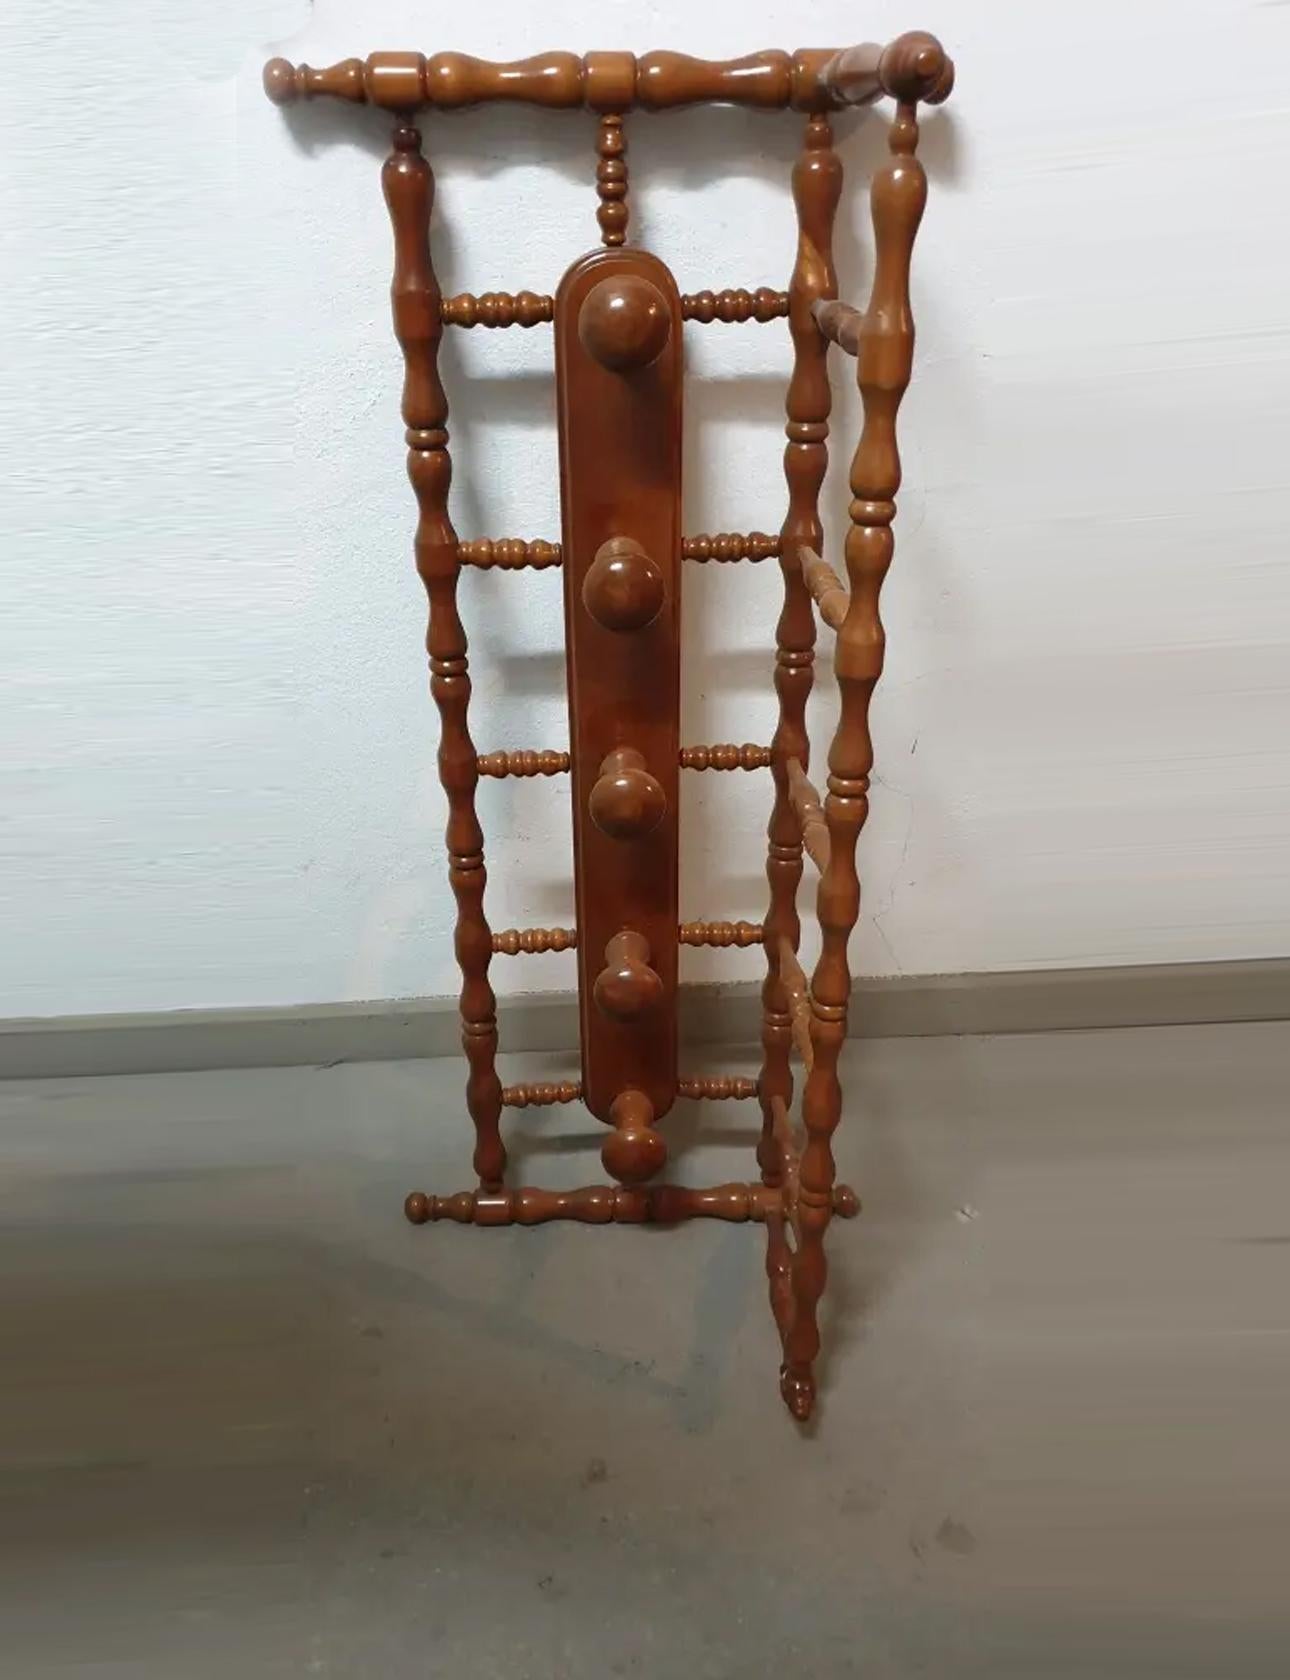 Large Wooden coat rack from the beginning of the 20th century

Perfect for entering your home to hang your bags coats
It has a top shelf to support the hats

Elegant and functional coat rack

It could also be used in the bathroom to hang